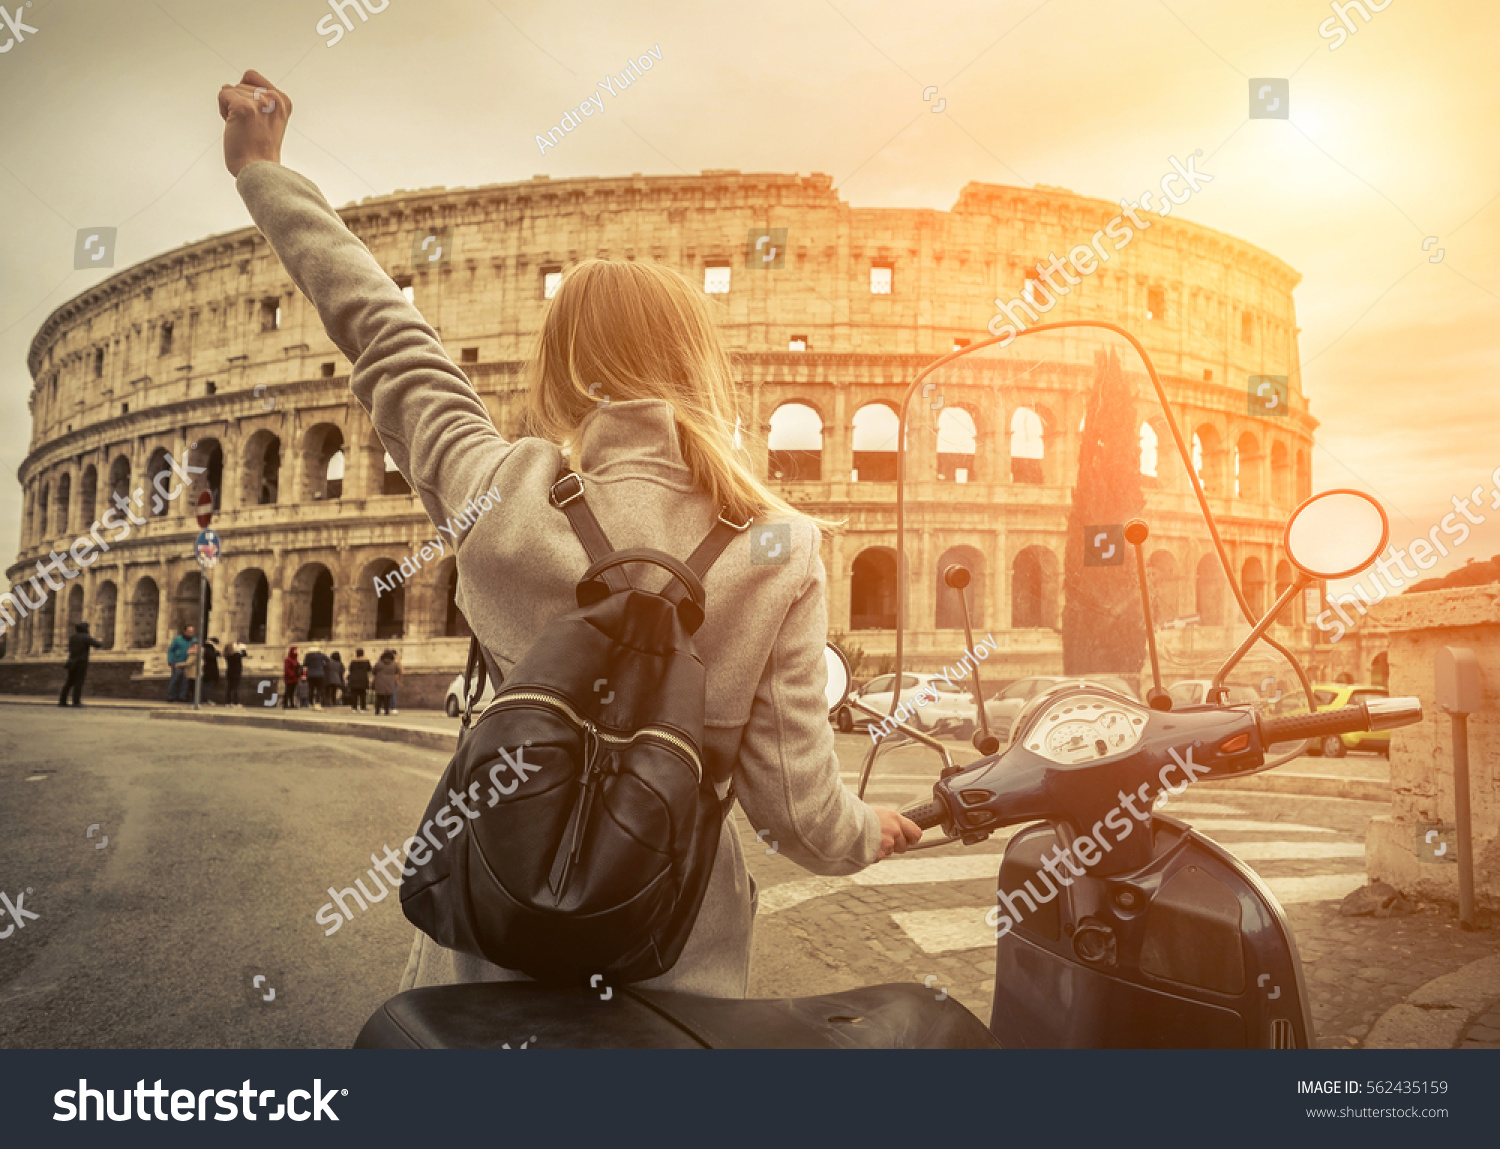 Woman tourist near the Coliseum in Rome under sunlight and blue sky. Famous popular touristic place in the world. #562435159